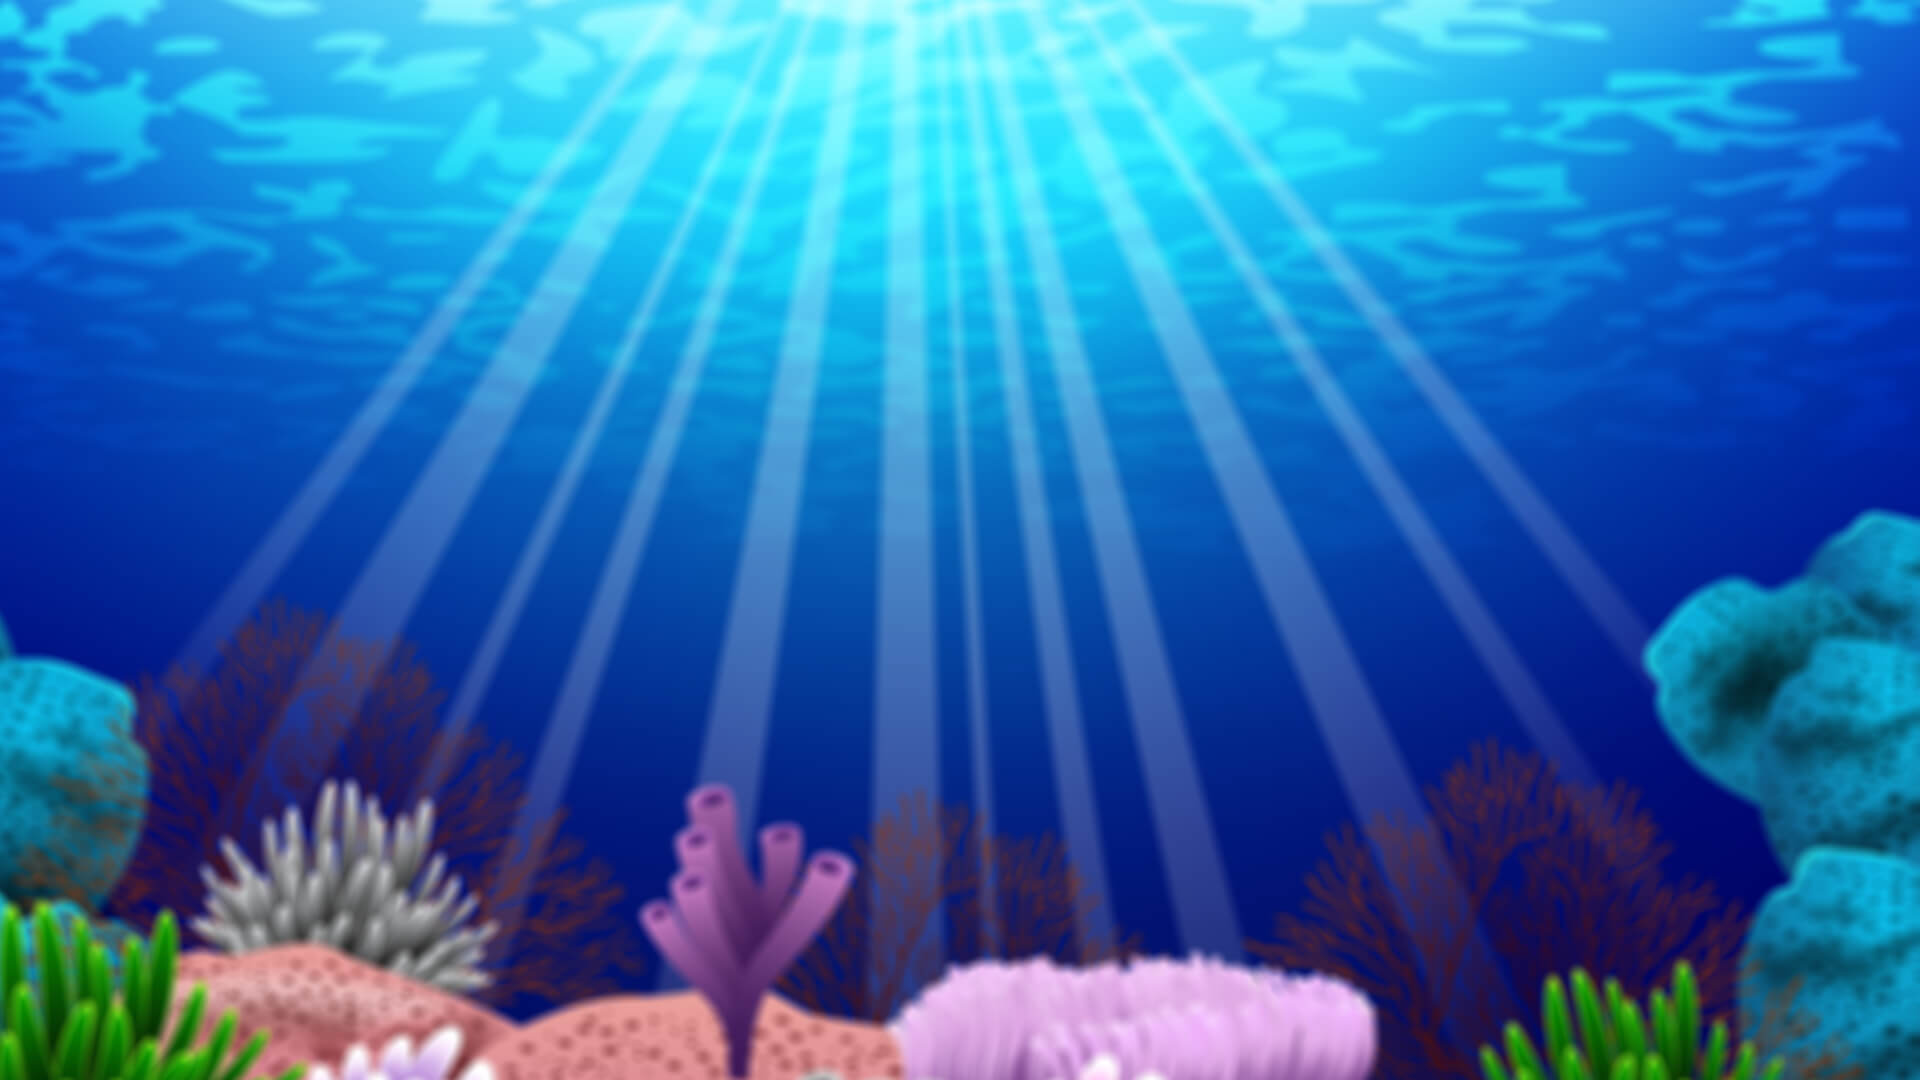 Game hight resolution background Coral Island